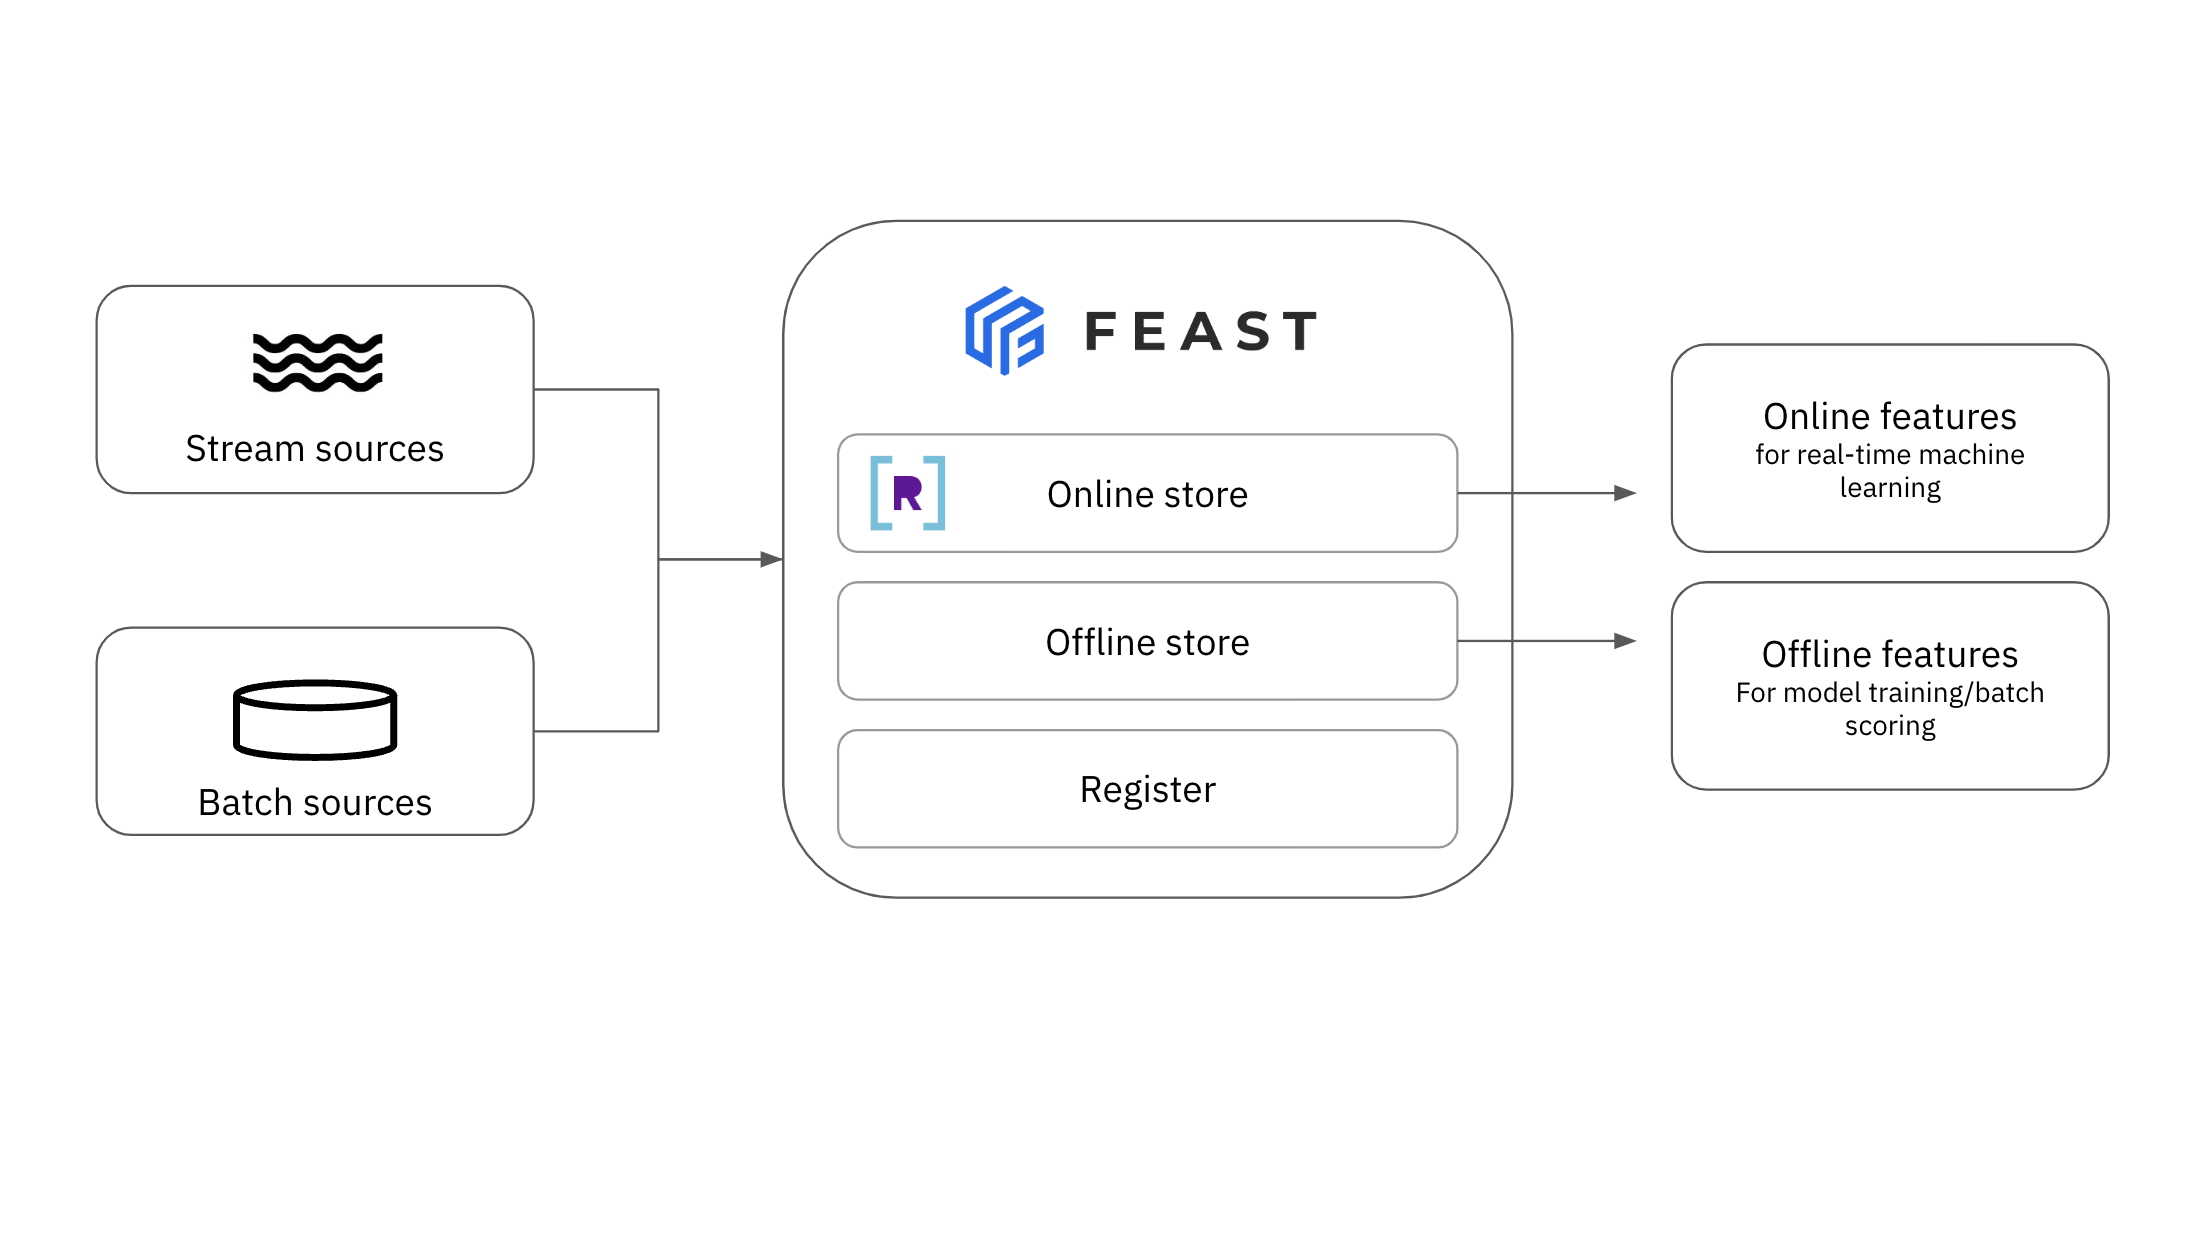 Rockset as an online feature store for real-time ML with Feast